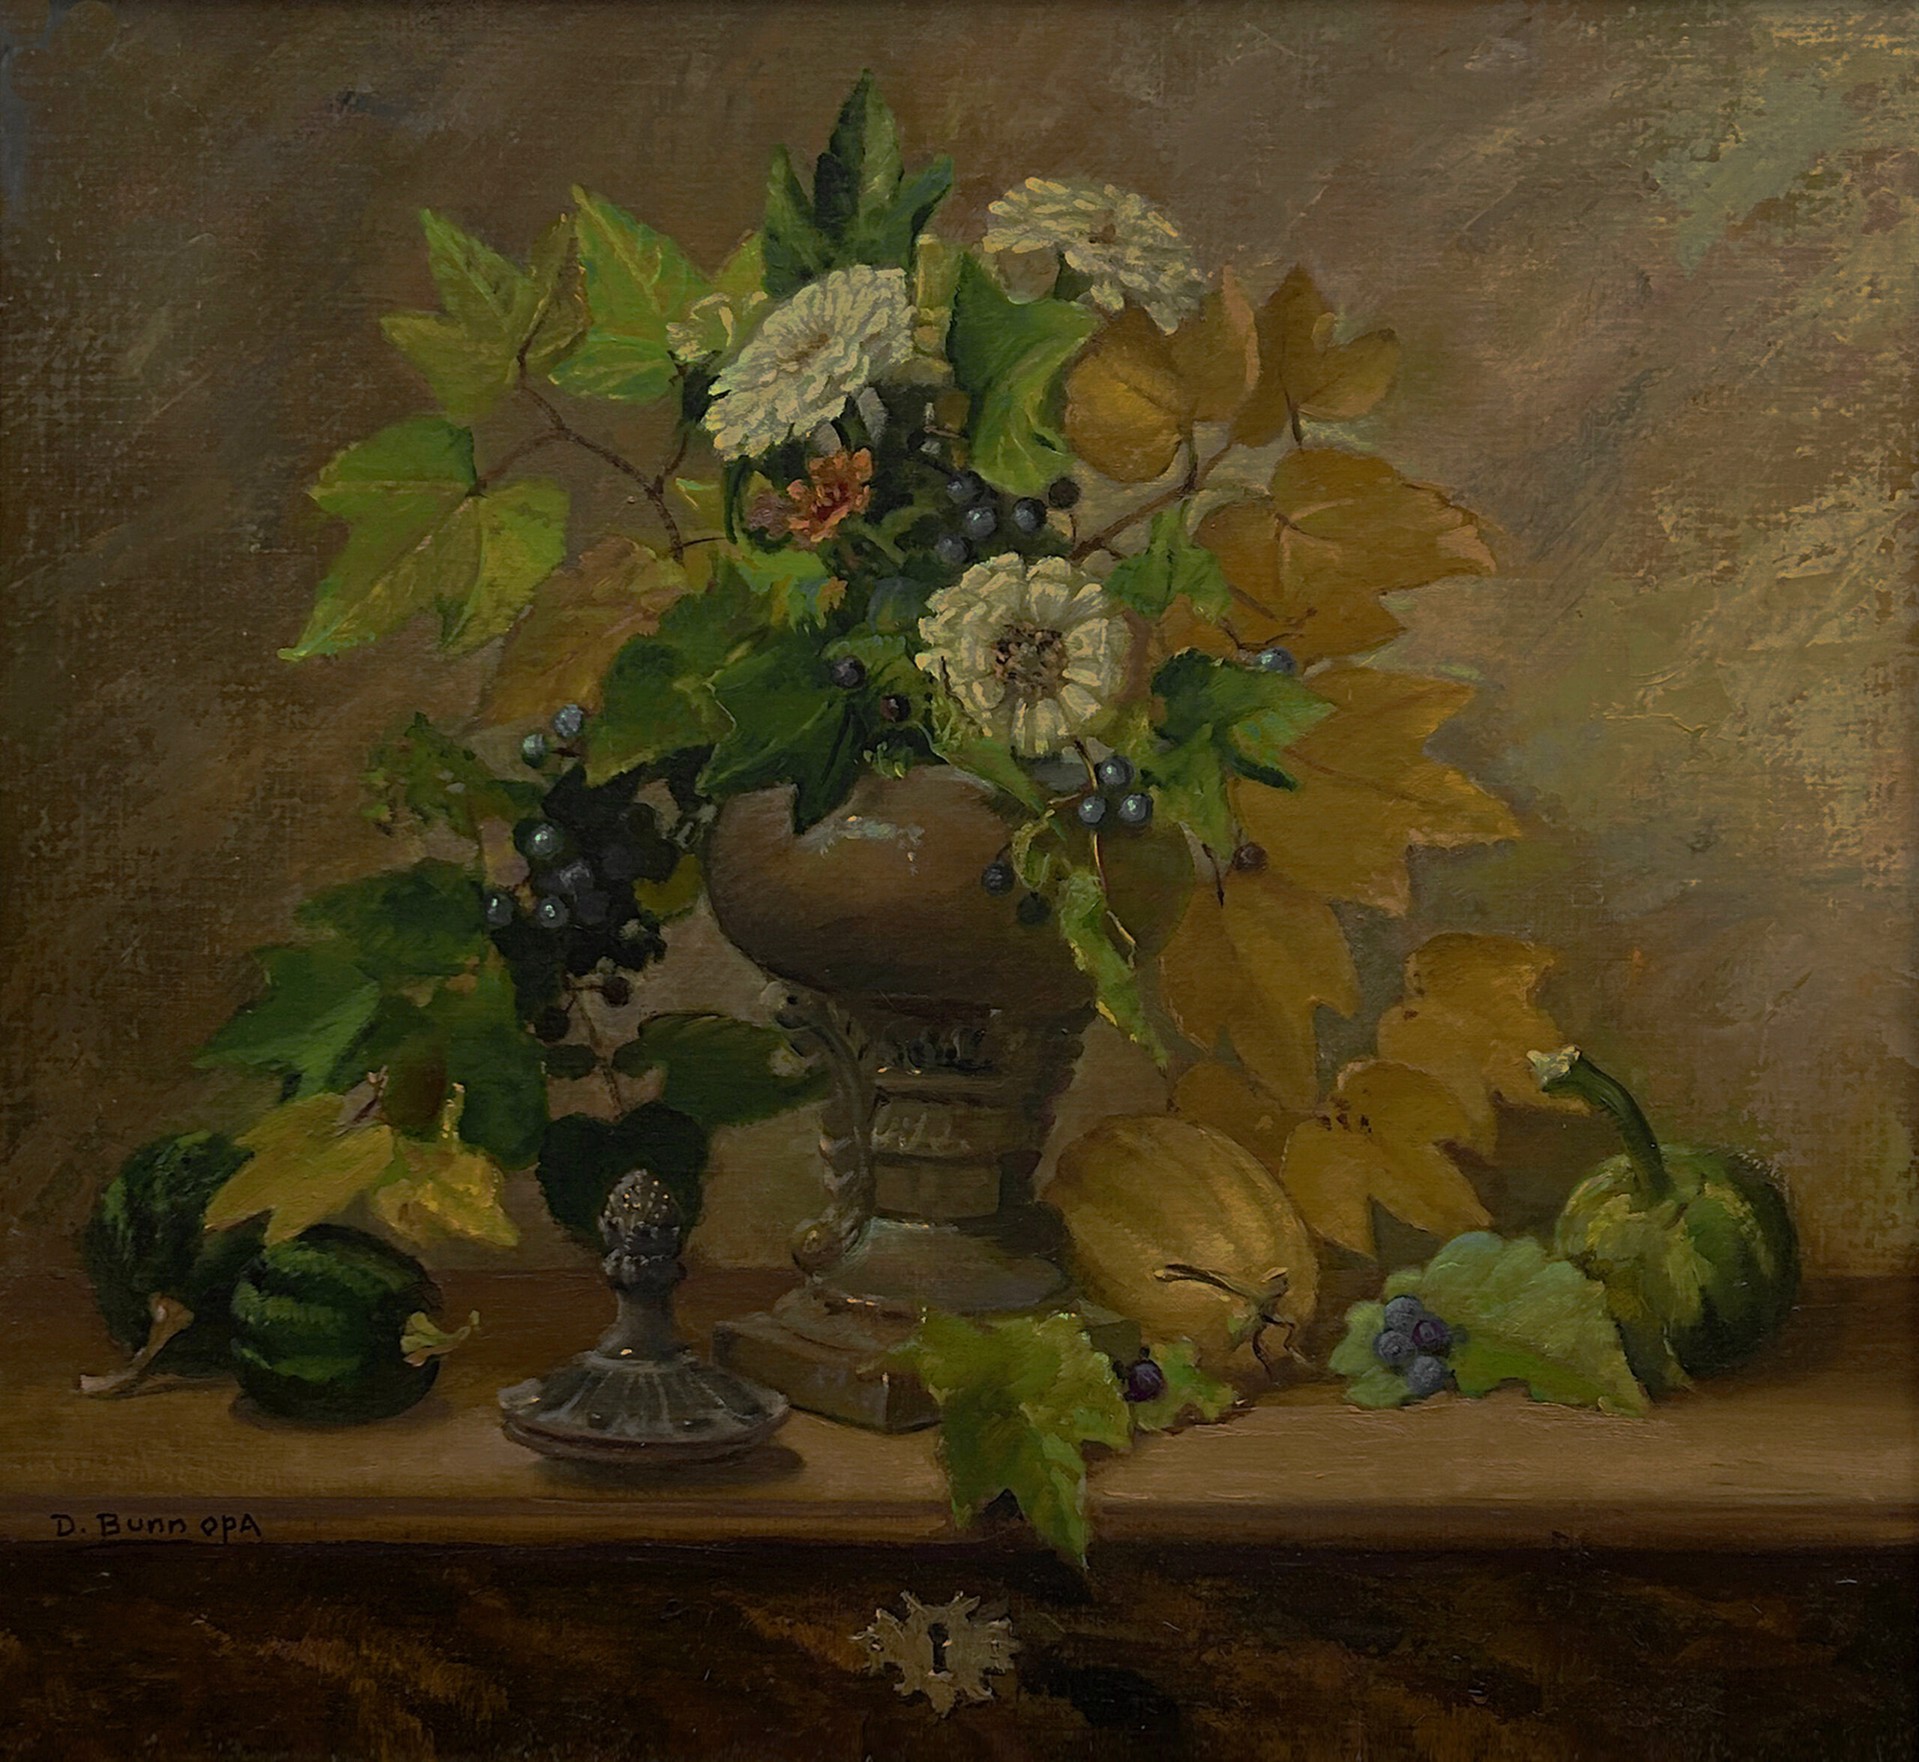 Dot Bunn "Leaves and Gourds" by Oil Painters of America